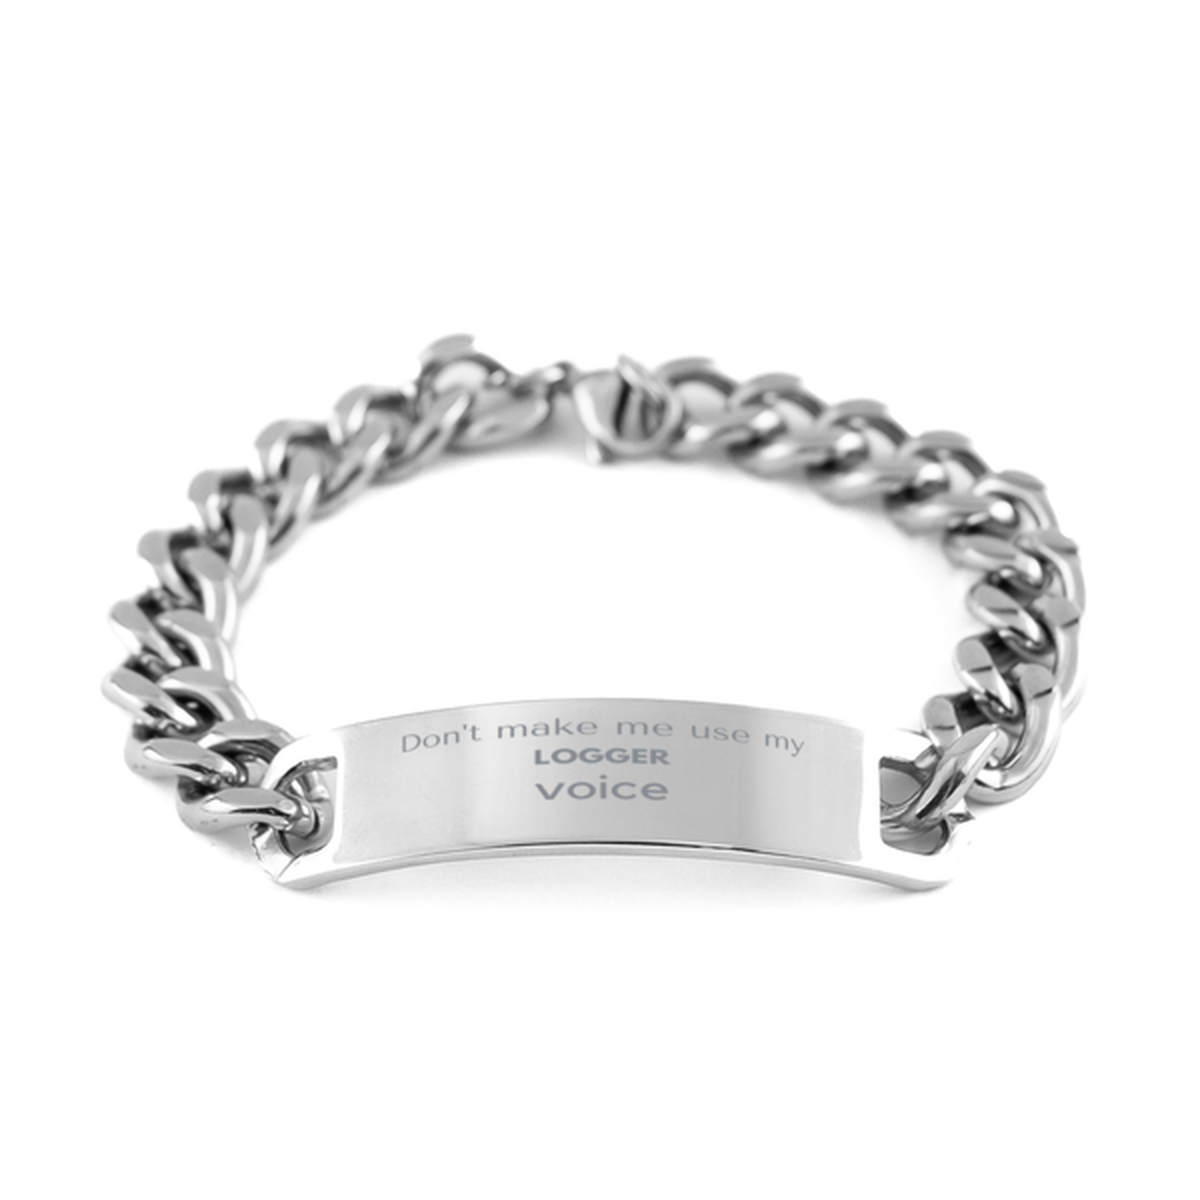 Don't make me use my Logger voice, Sarcasm Logger Gifts, Christmas Logger Cuban Chain Stainless Steel Bracelet Birthday Unique Gifts For Logger Coworkers, Men, Women, Colleague, Friends